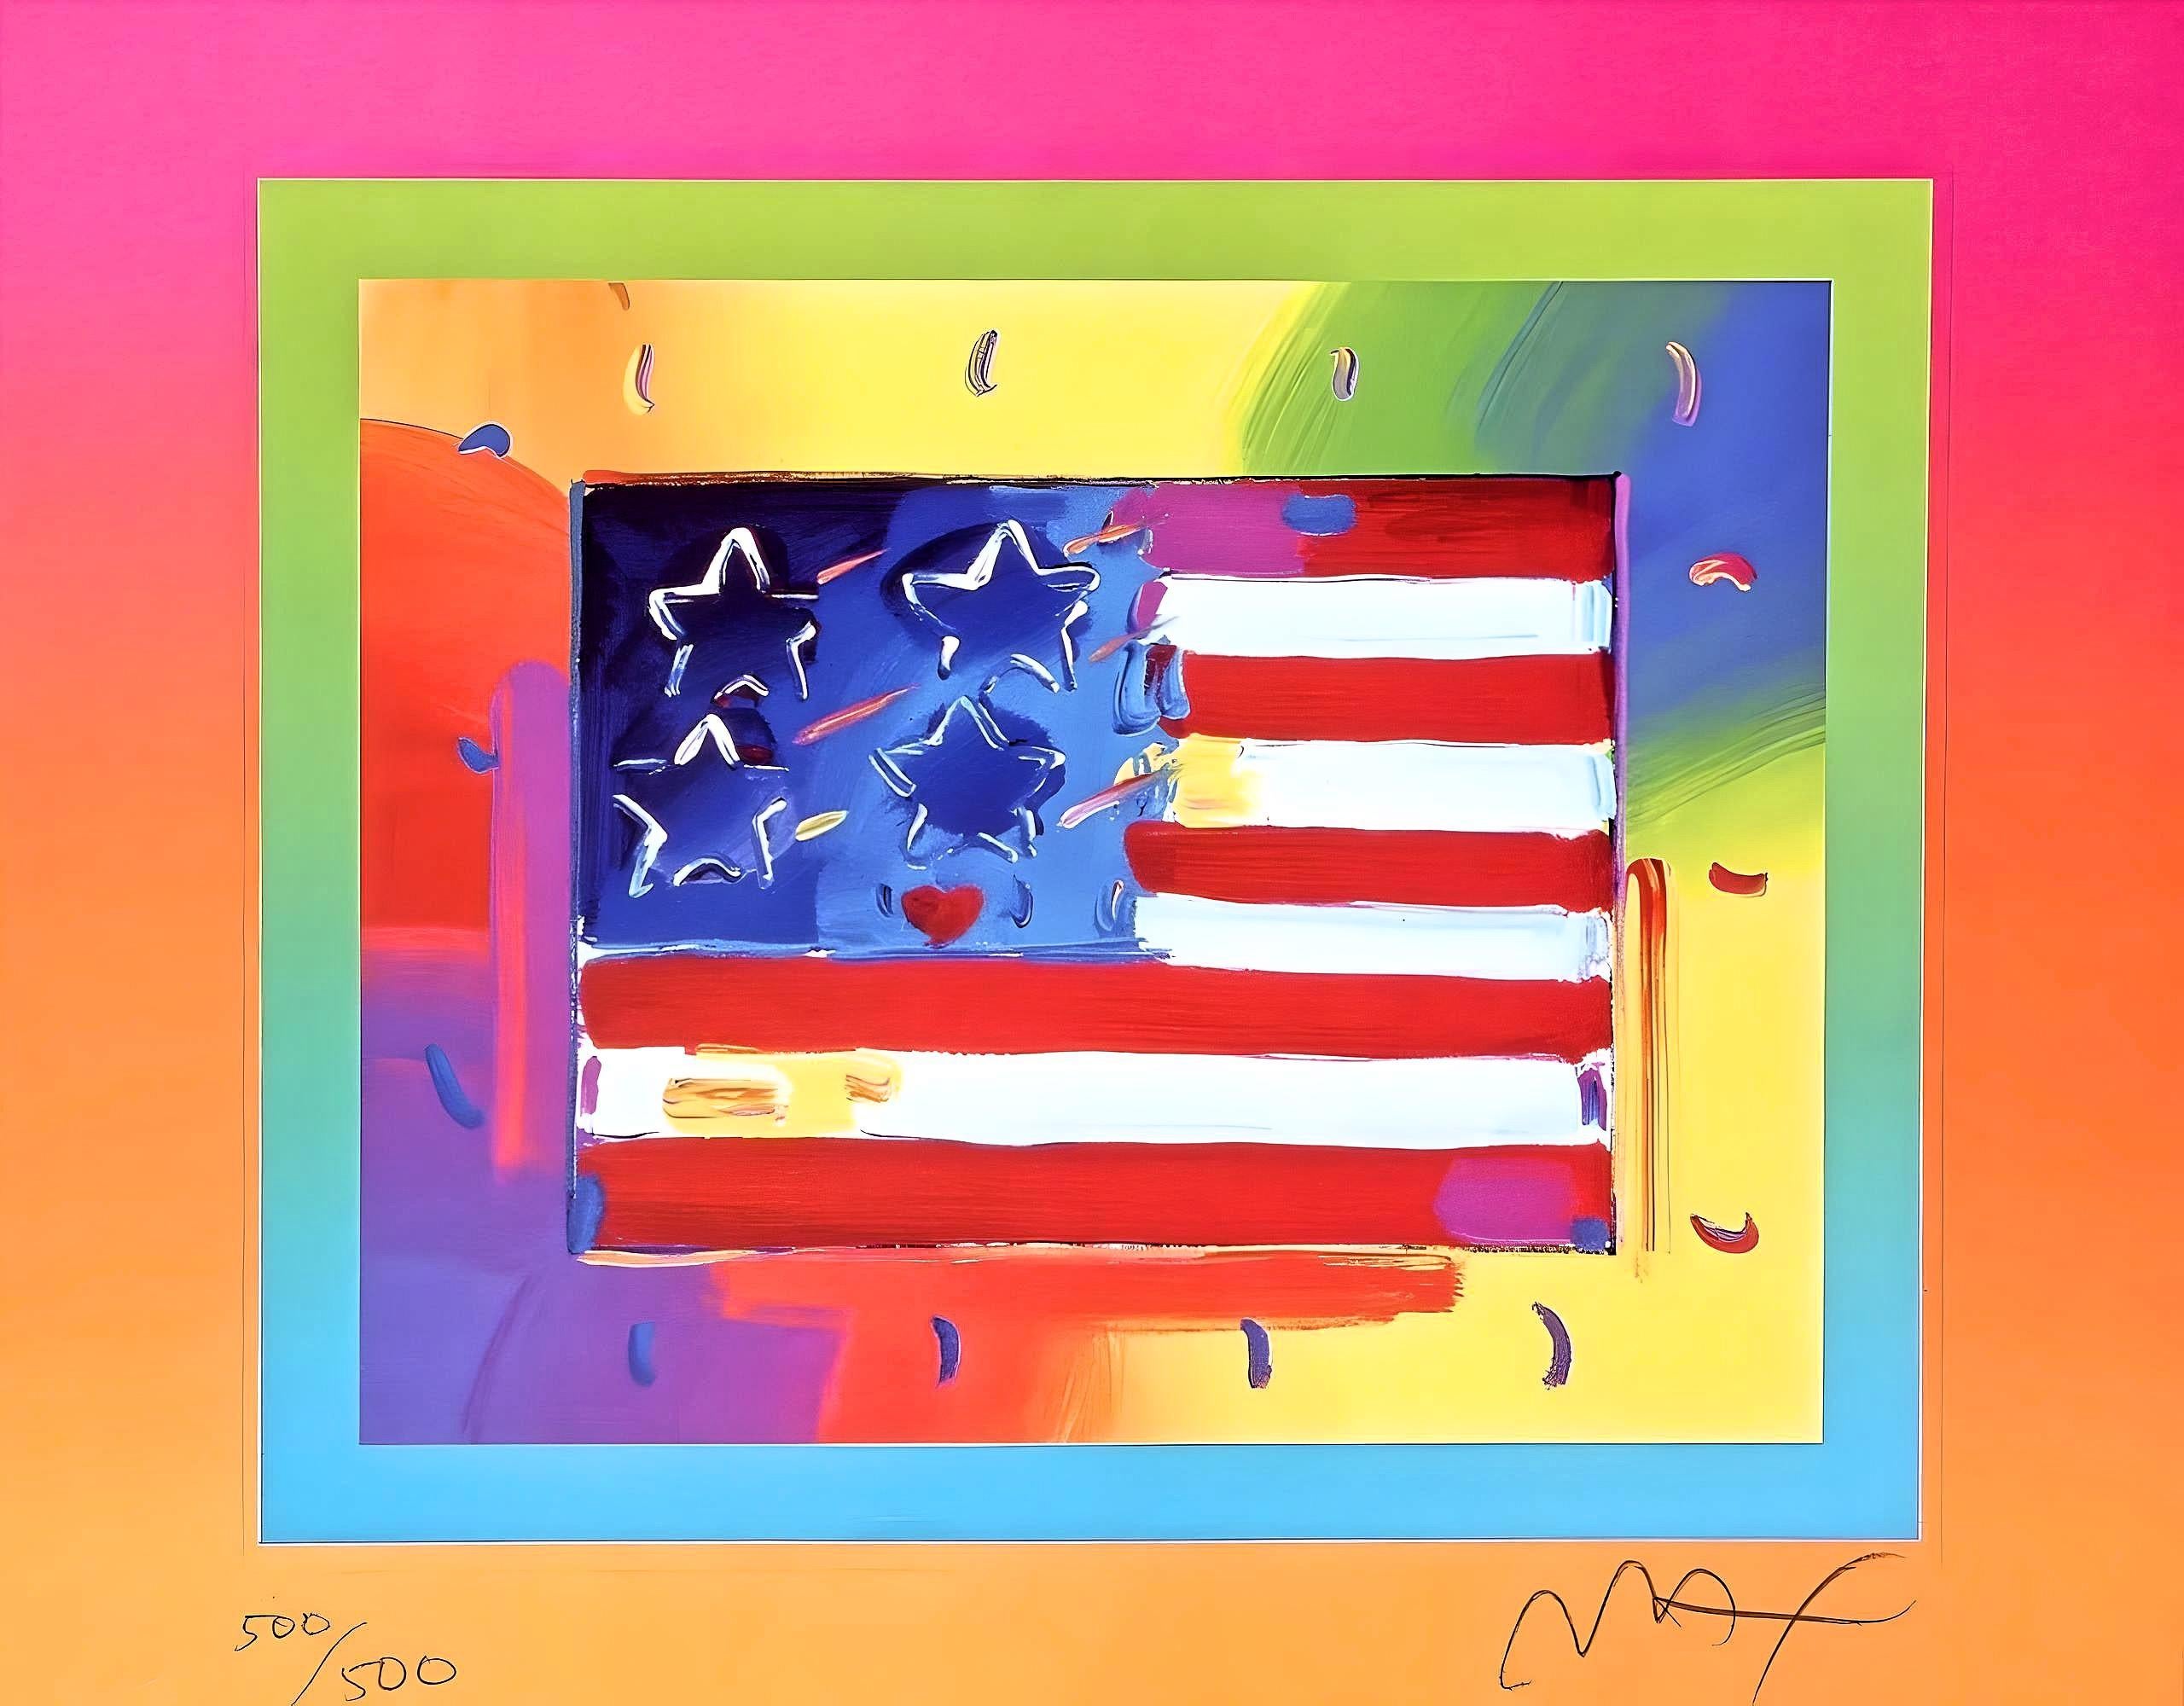 Artist: Peter Max (1937)
Title: Flag on Blends
Year: 2005
Edition: 500/500, plus proofs
Medium: Lithograph on Lustro Saxony paper
Size: 8 x 10 inches
Condition: Excellent
Inscription: Signed and numbered by the artist.
Notes: Published by Via